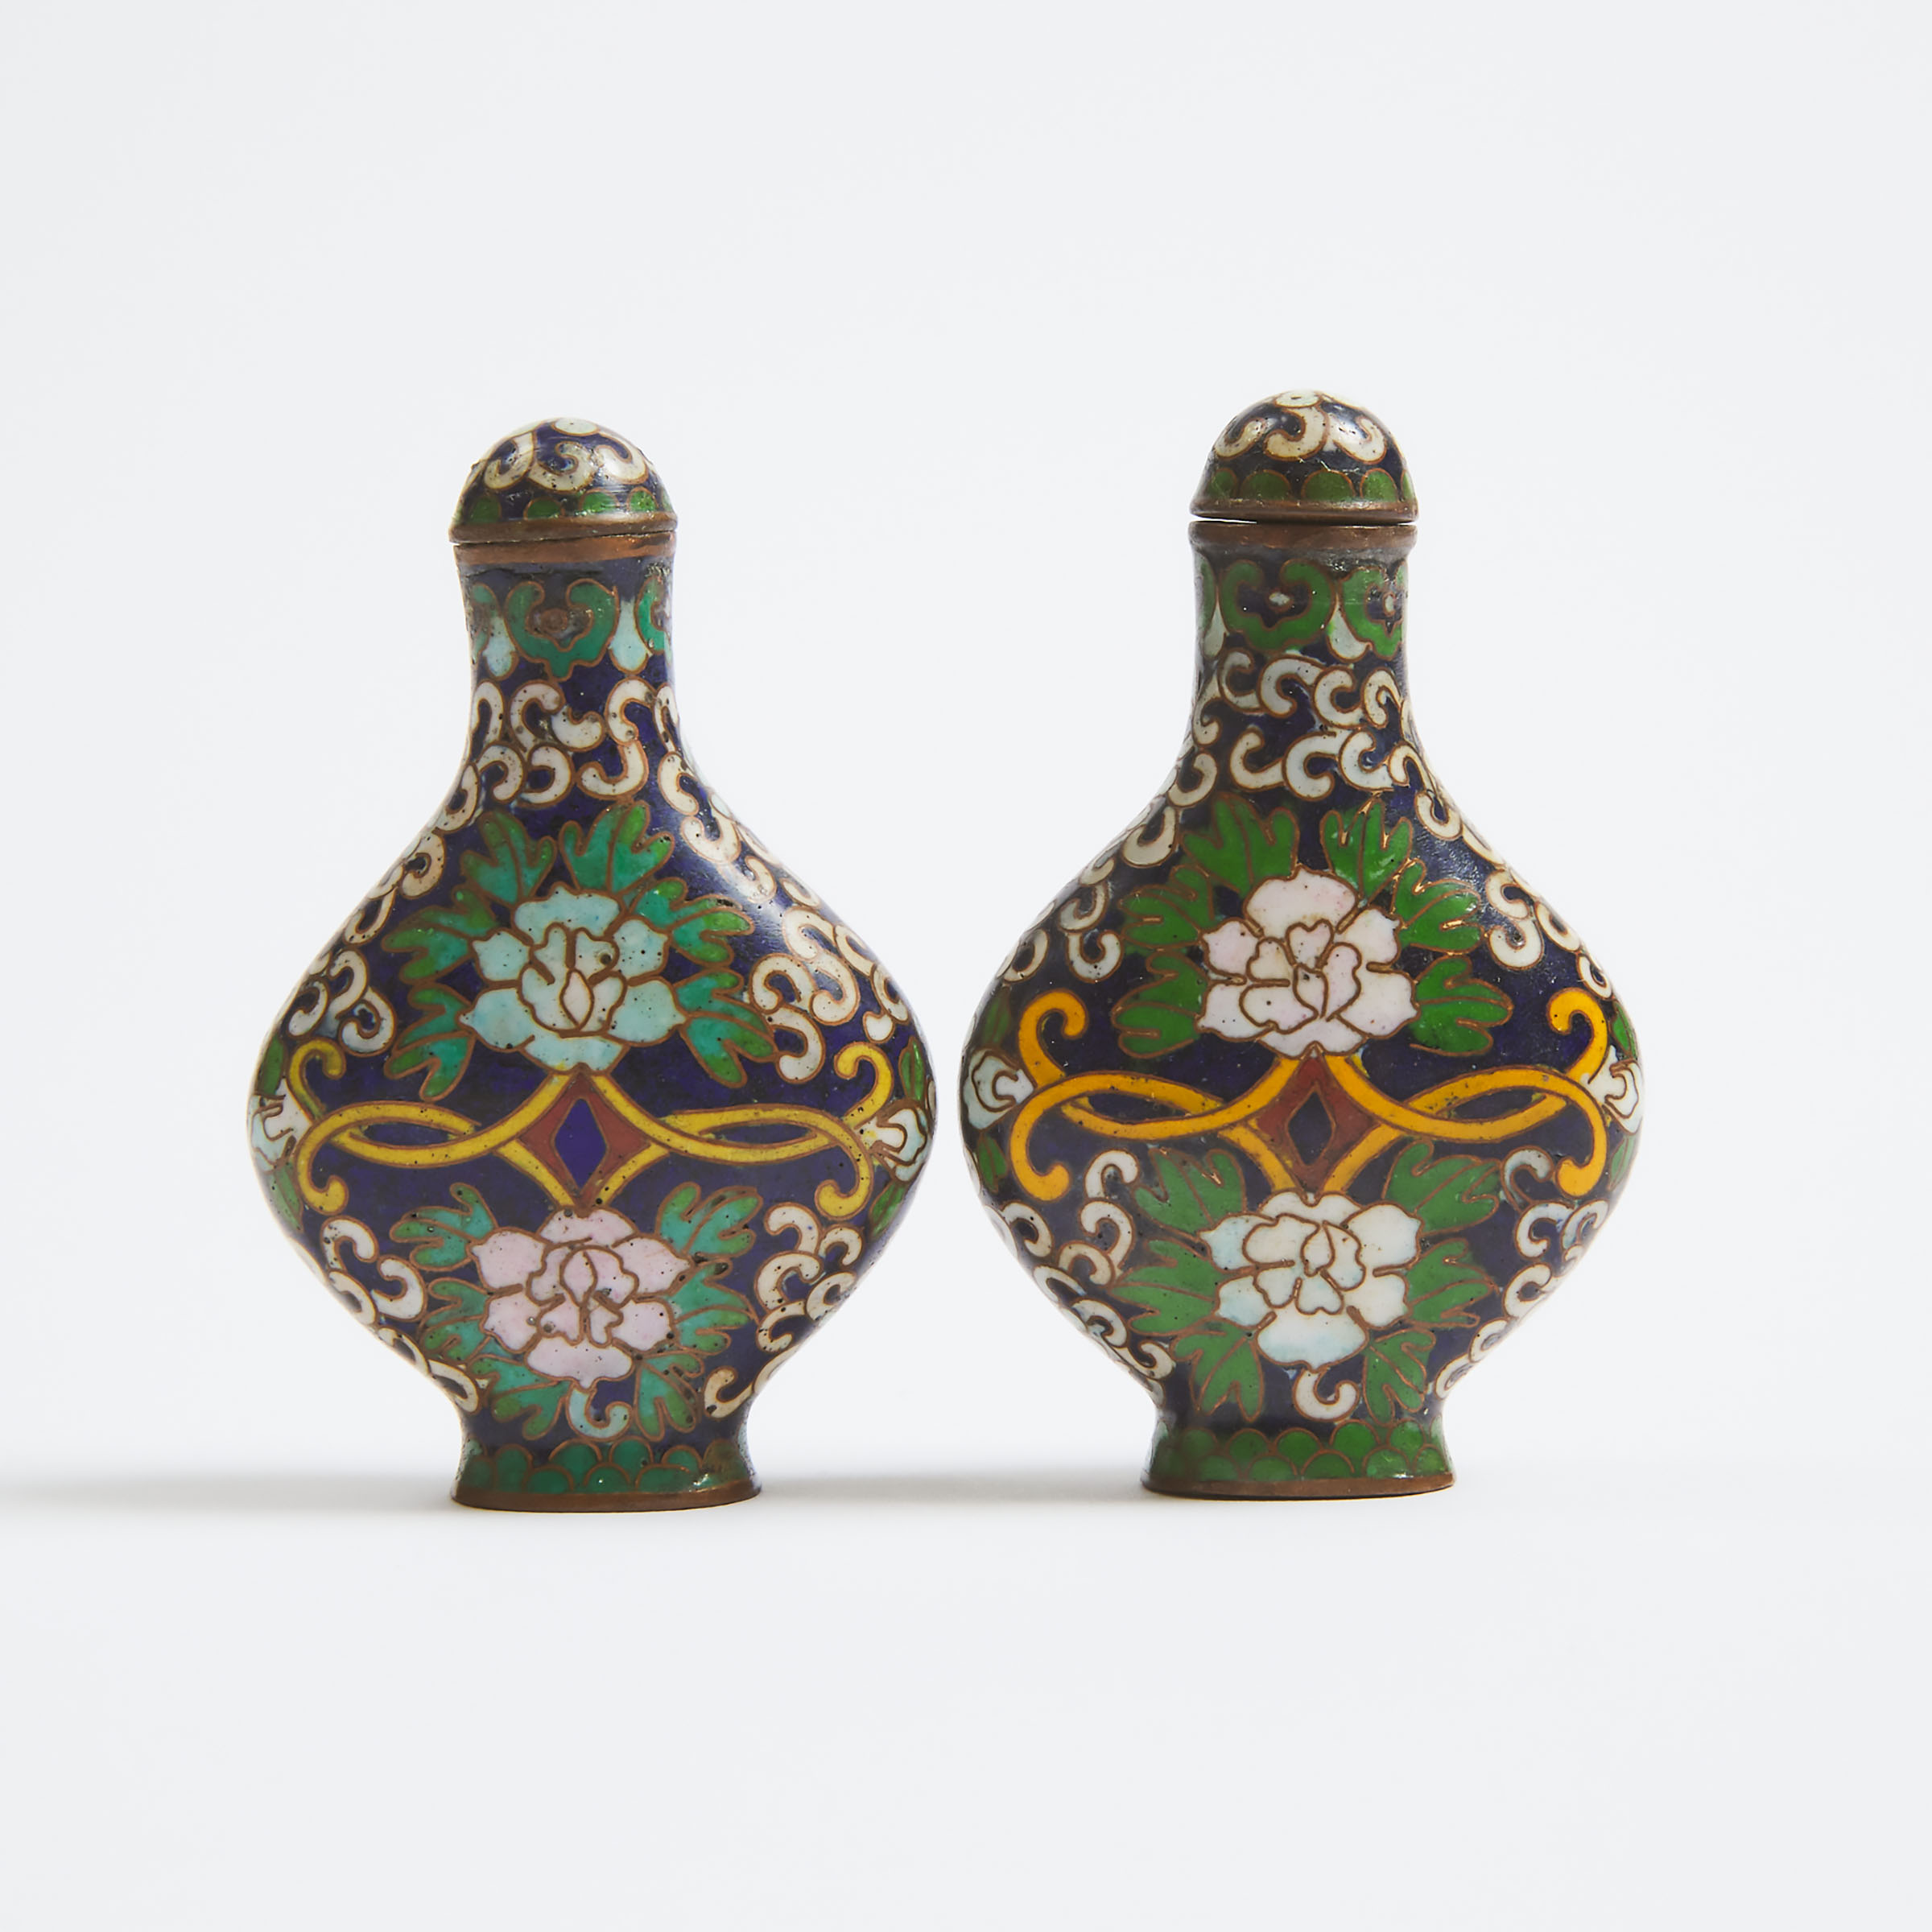 A Pair of Cloisonné Enamel Snuff Bottles, Republican Period, Early 20th Century